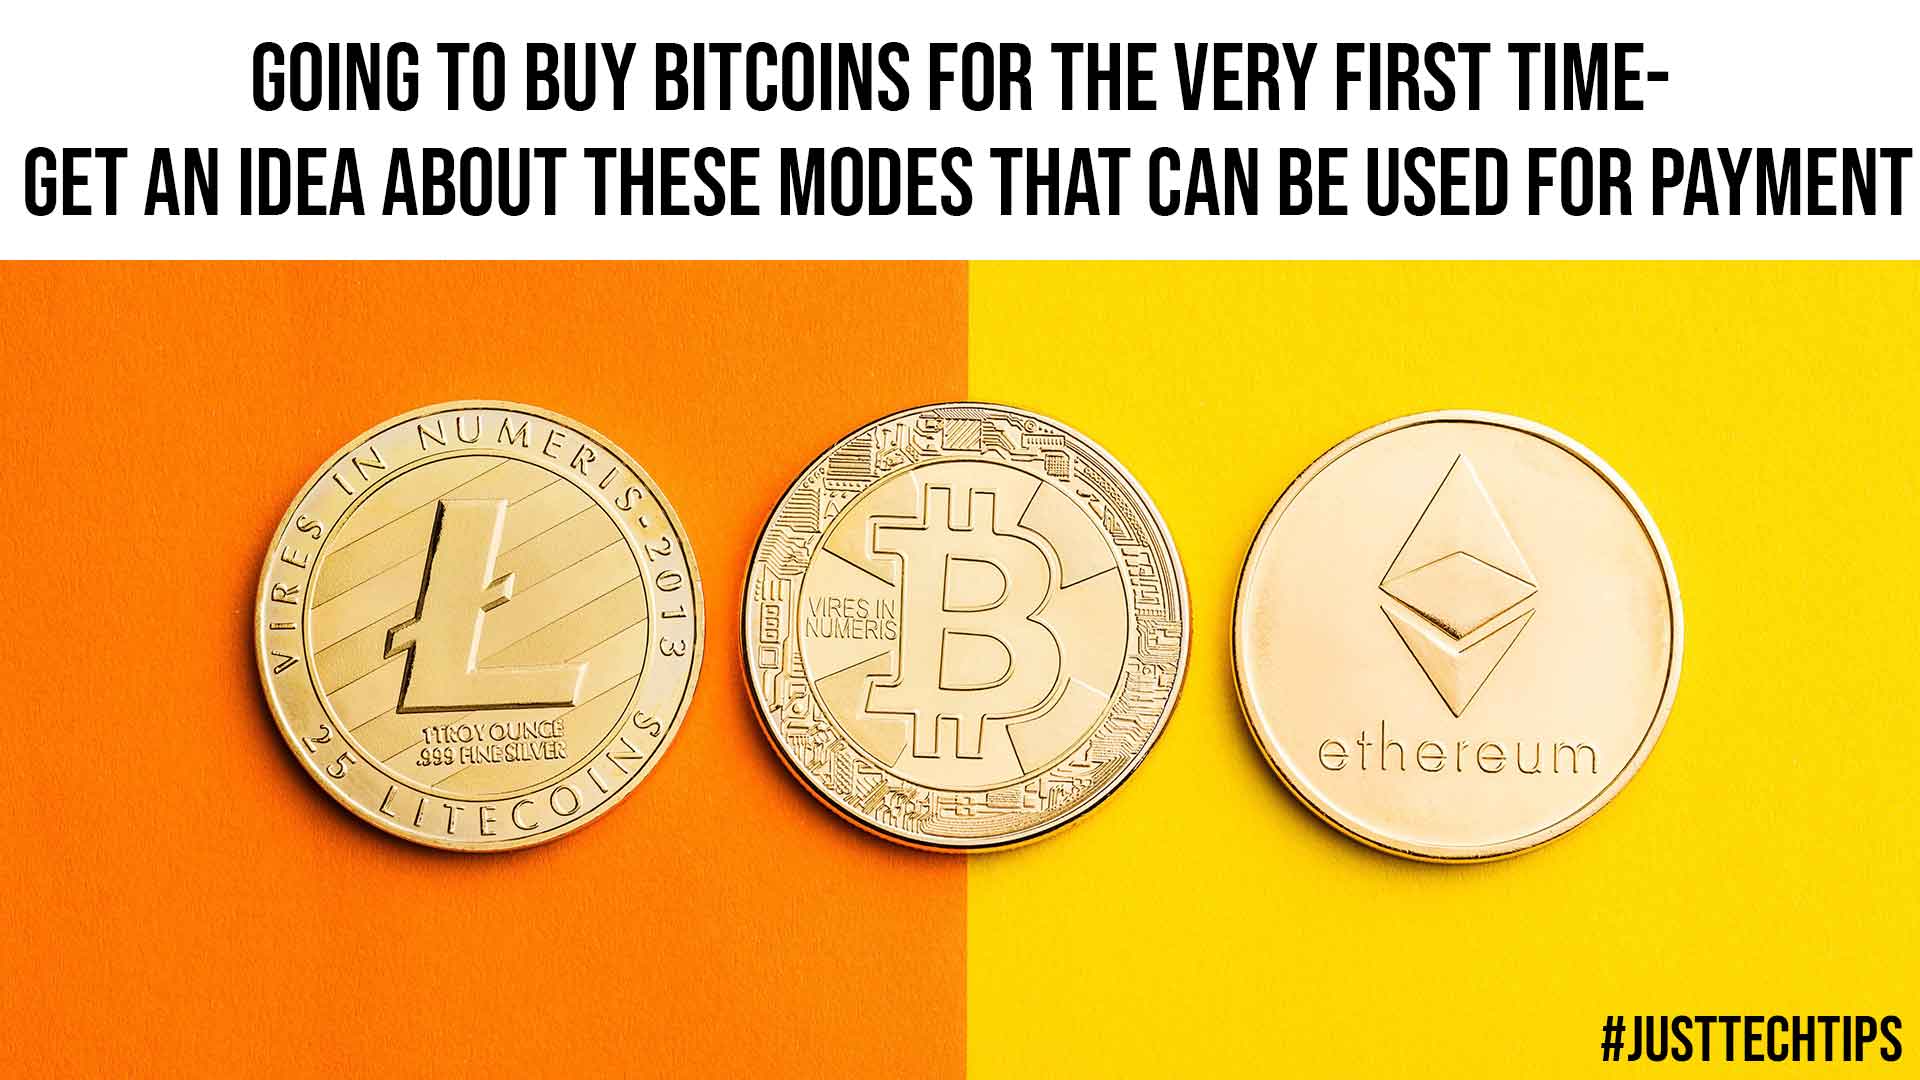 Going to Buy Bitcoins for the Very First Time Get an Idea about these Modes that Can be Used for Payment